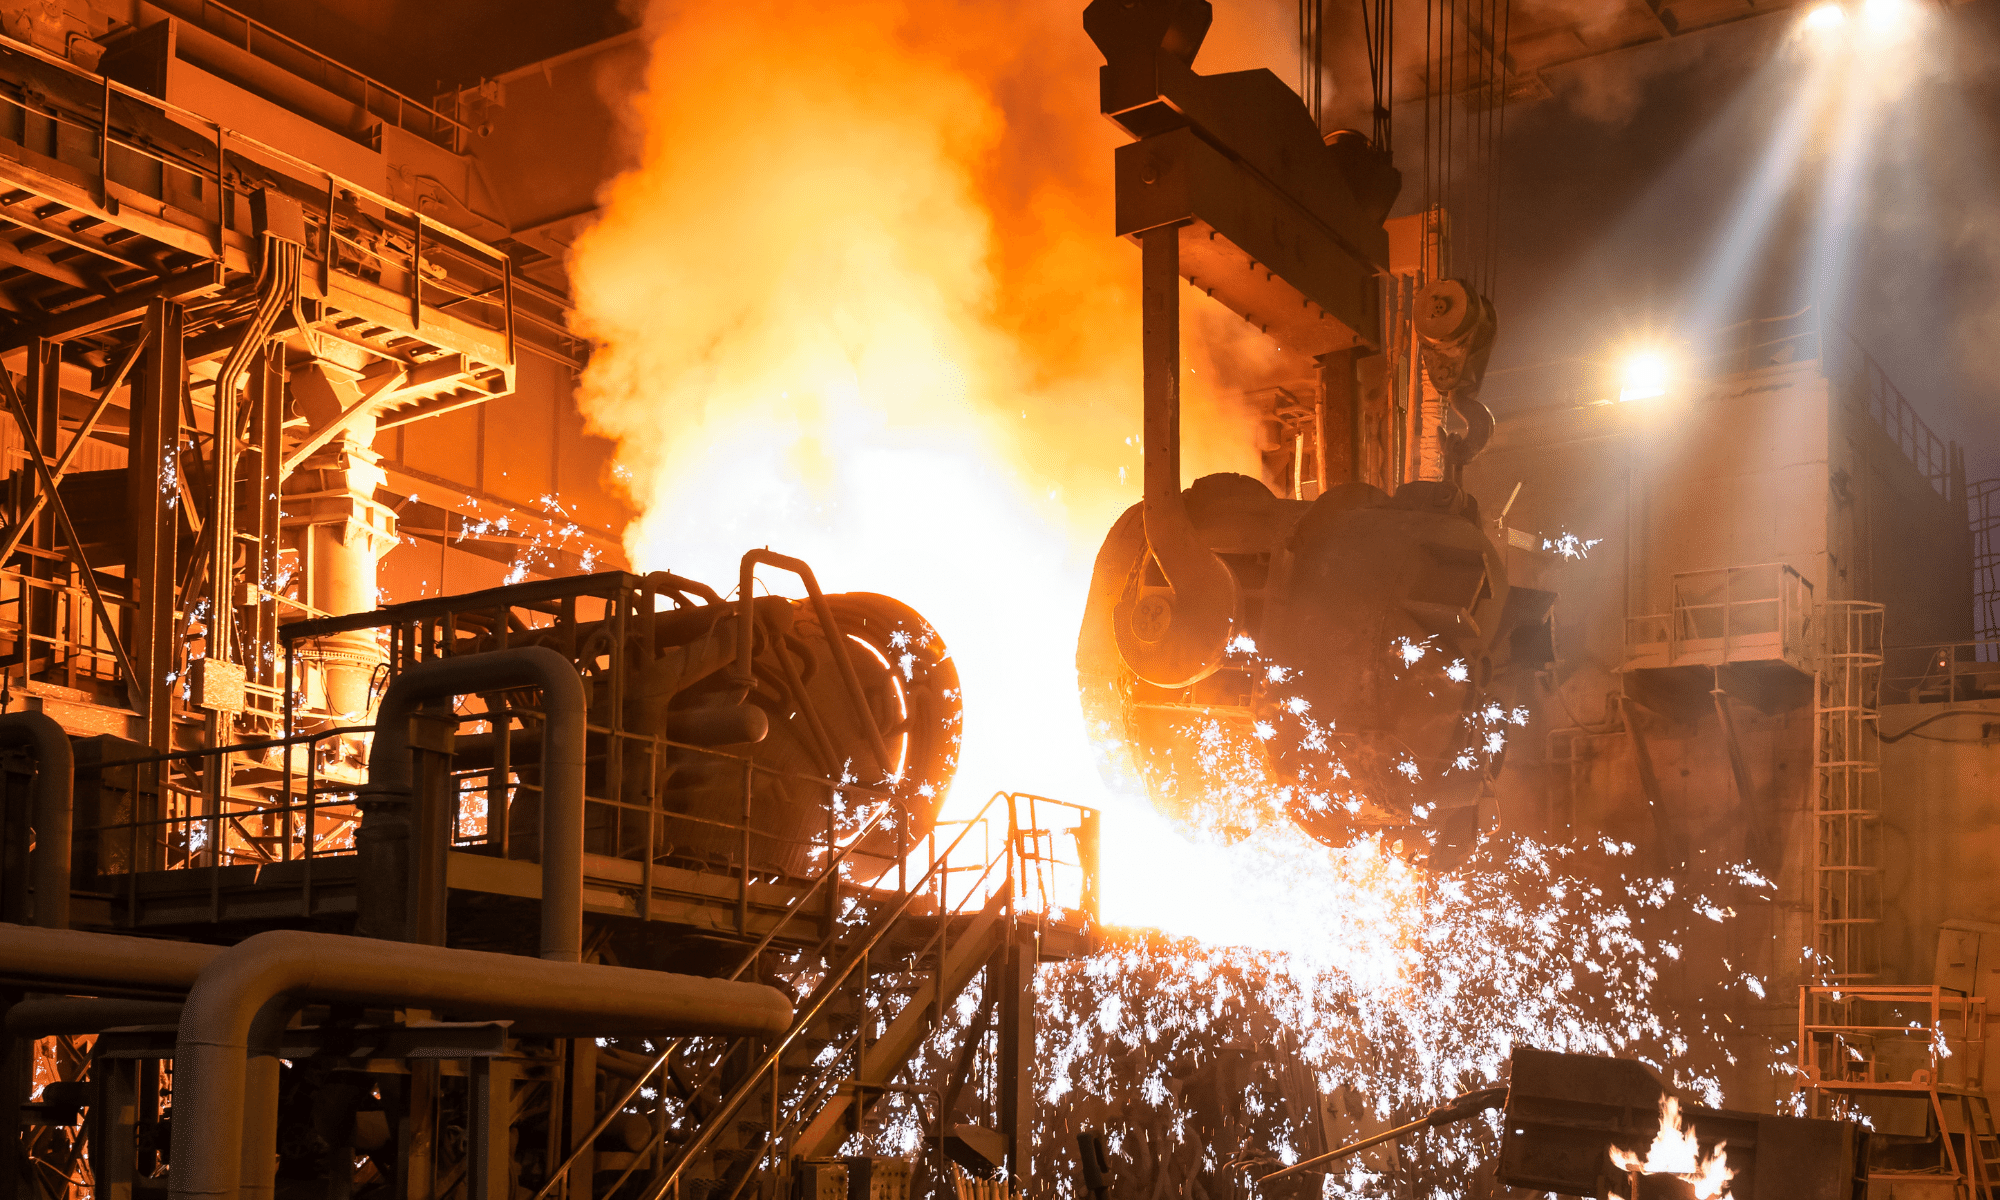 Carpenter Brothers, Inc. offers a complete line of foundry products and equipment to meet the requirements of the Metalcasting Industry.